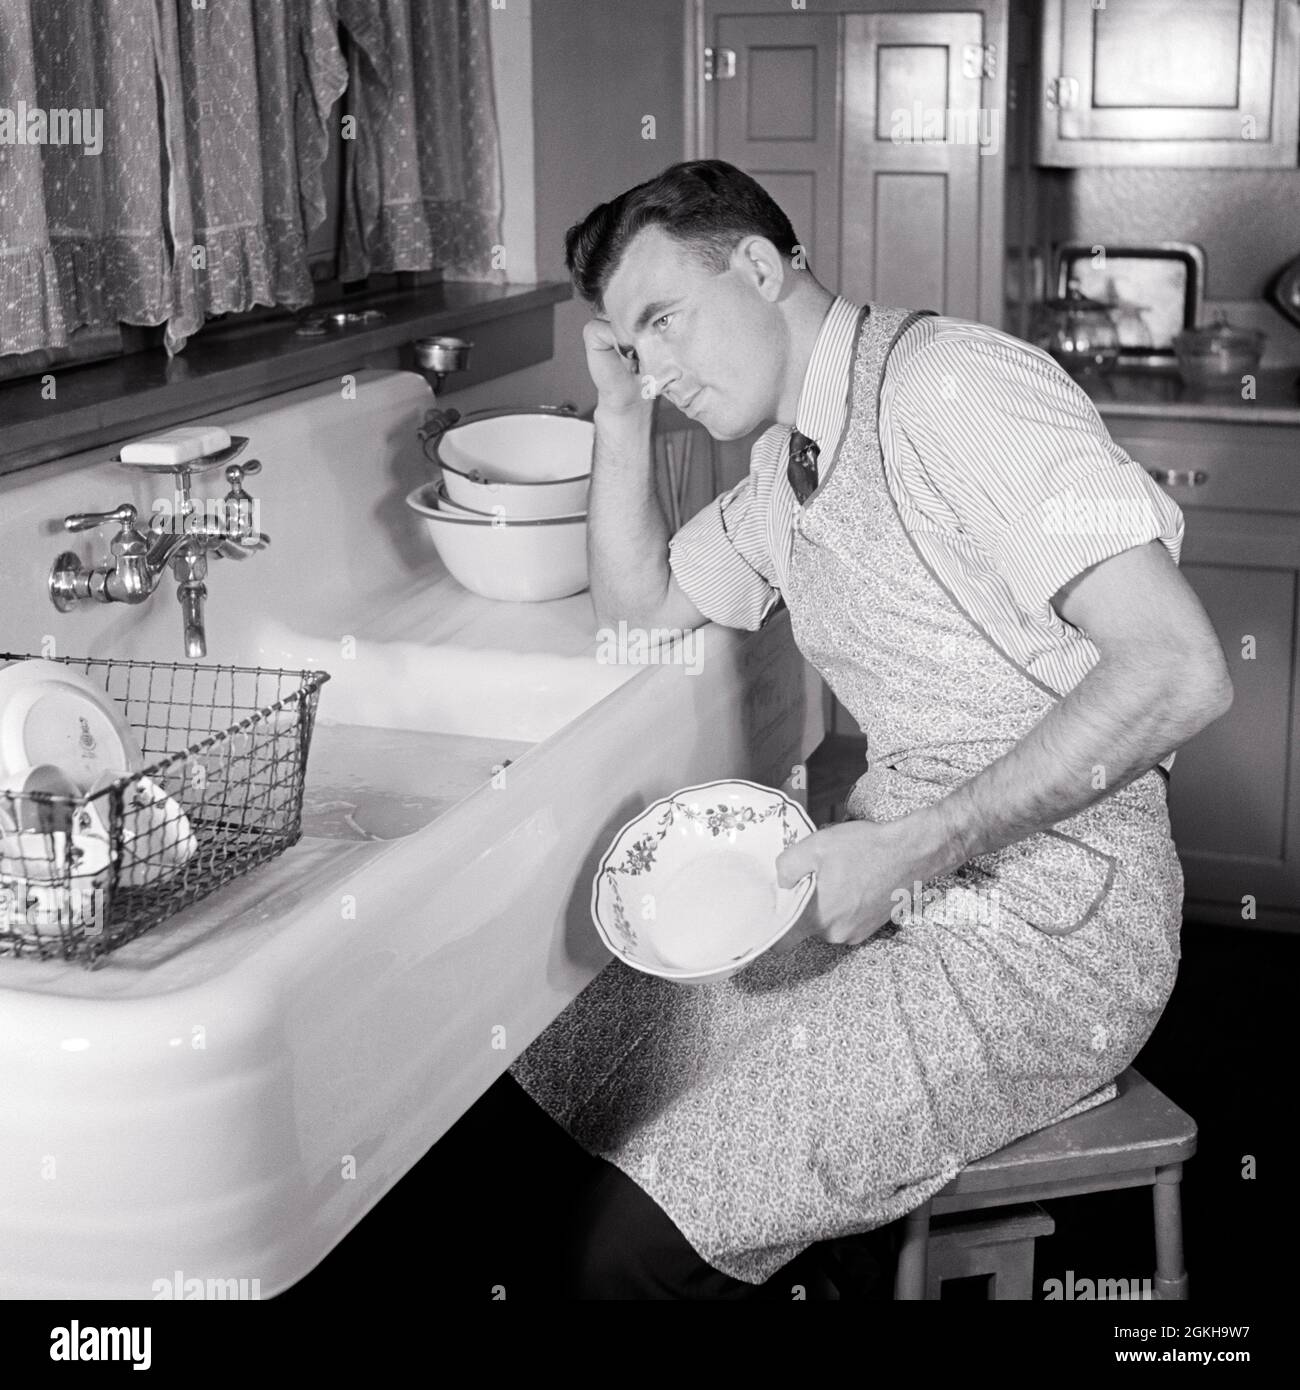 Washing Dishes 1930s High Resolution Stock Photography and Images - Alamy